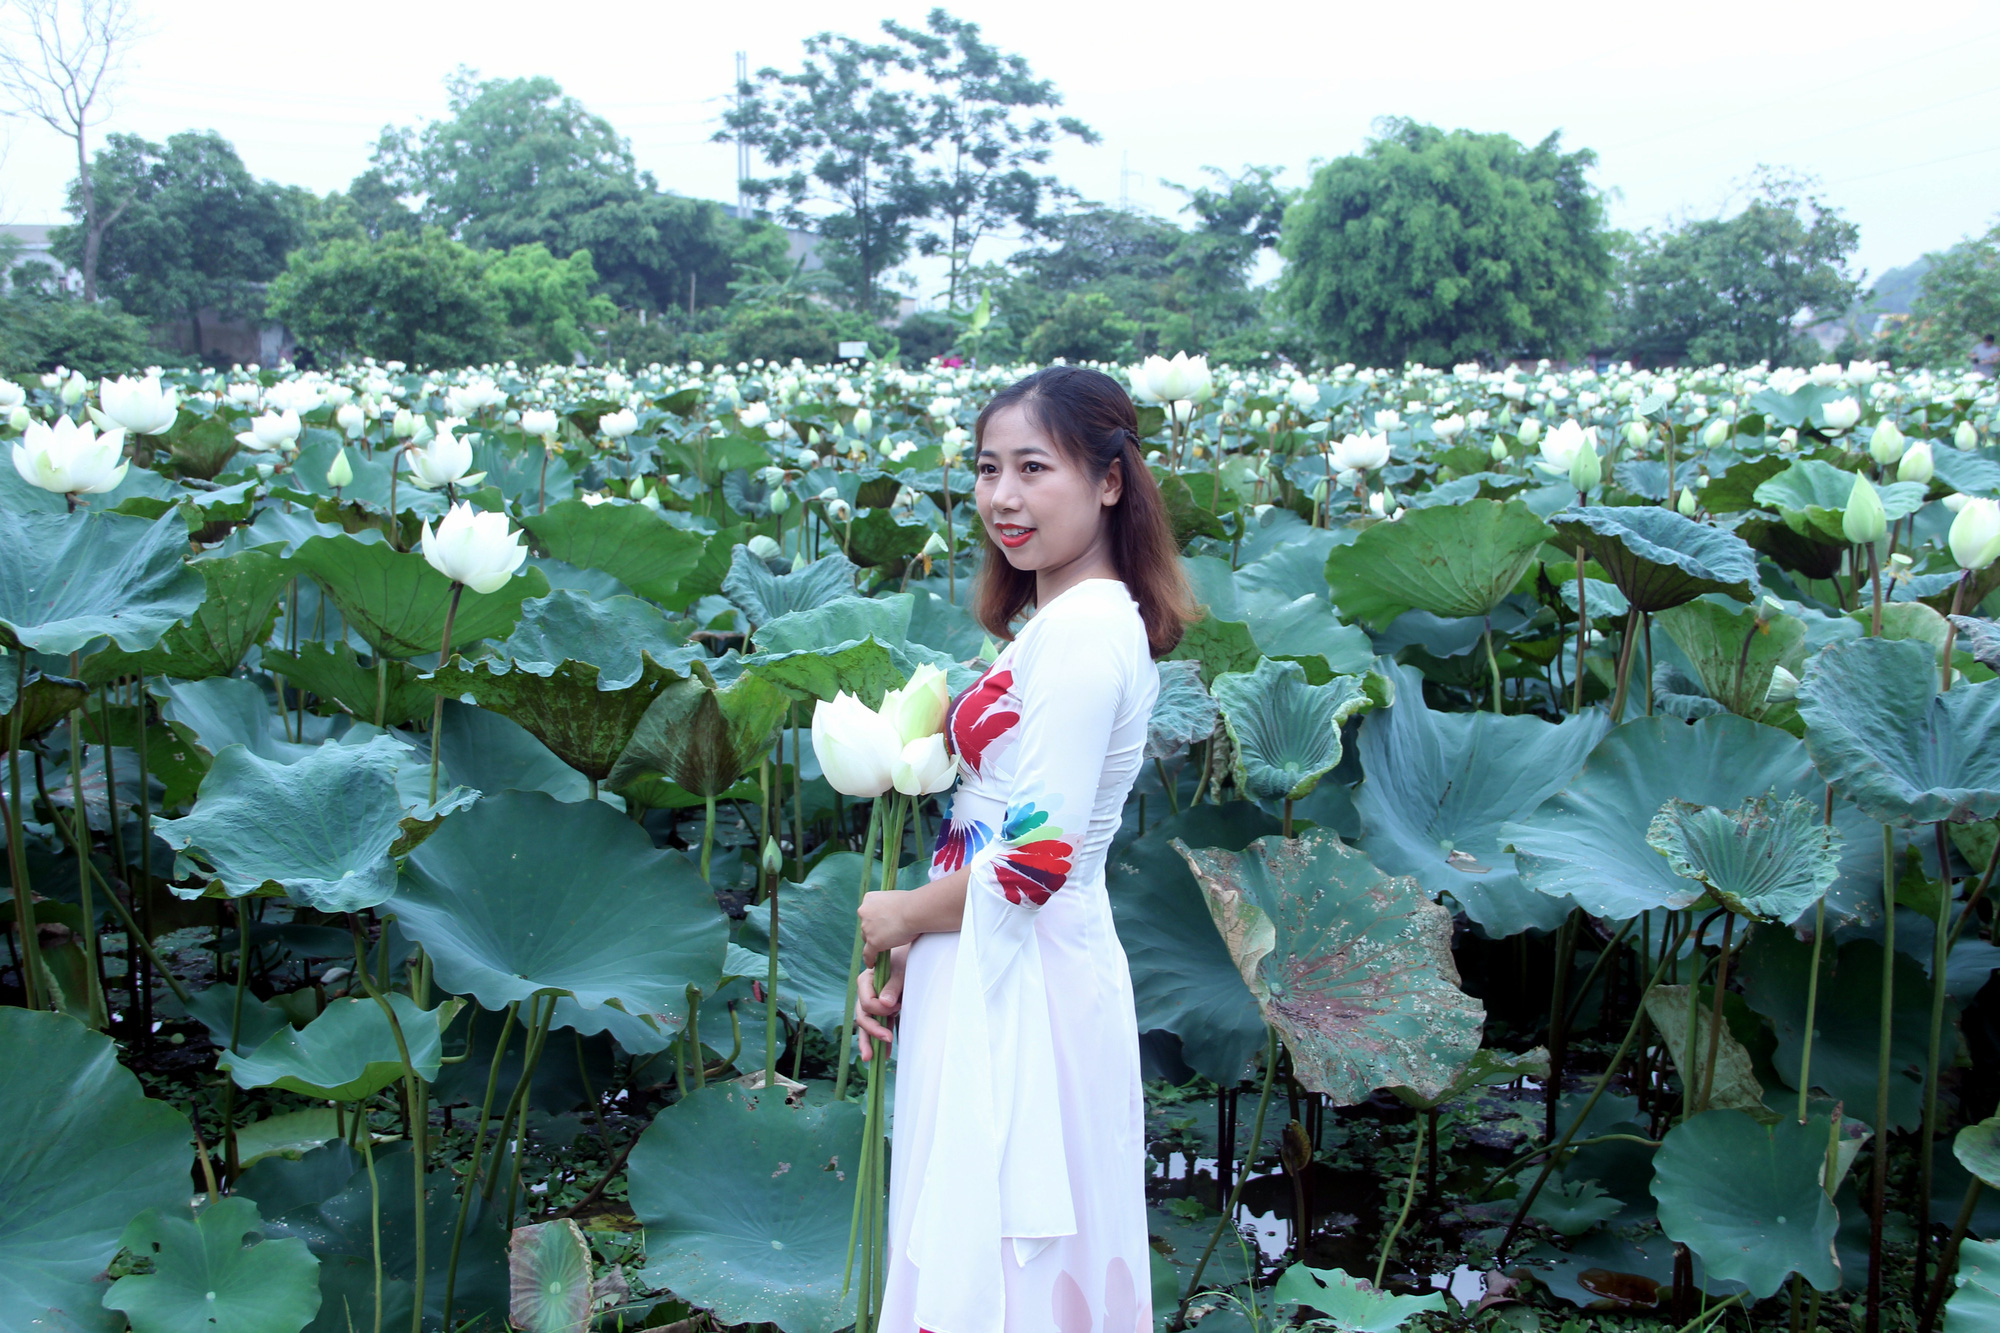 A woman in the traditional Vietnamese ‘ao dai’ poses with white lotus flowers at a pond in Tam Hung Commune, Thanh Oai District, Hanoi, Vietnam in this photo taken in May 2020. Photo: Duong Lieu / Tuoi Tre